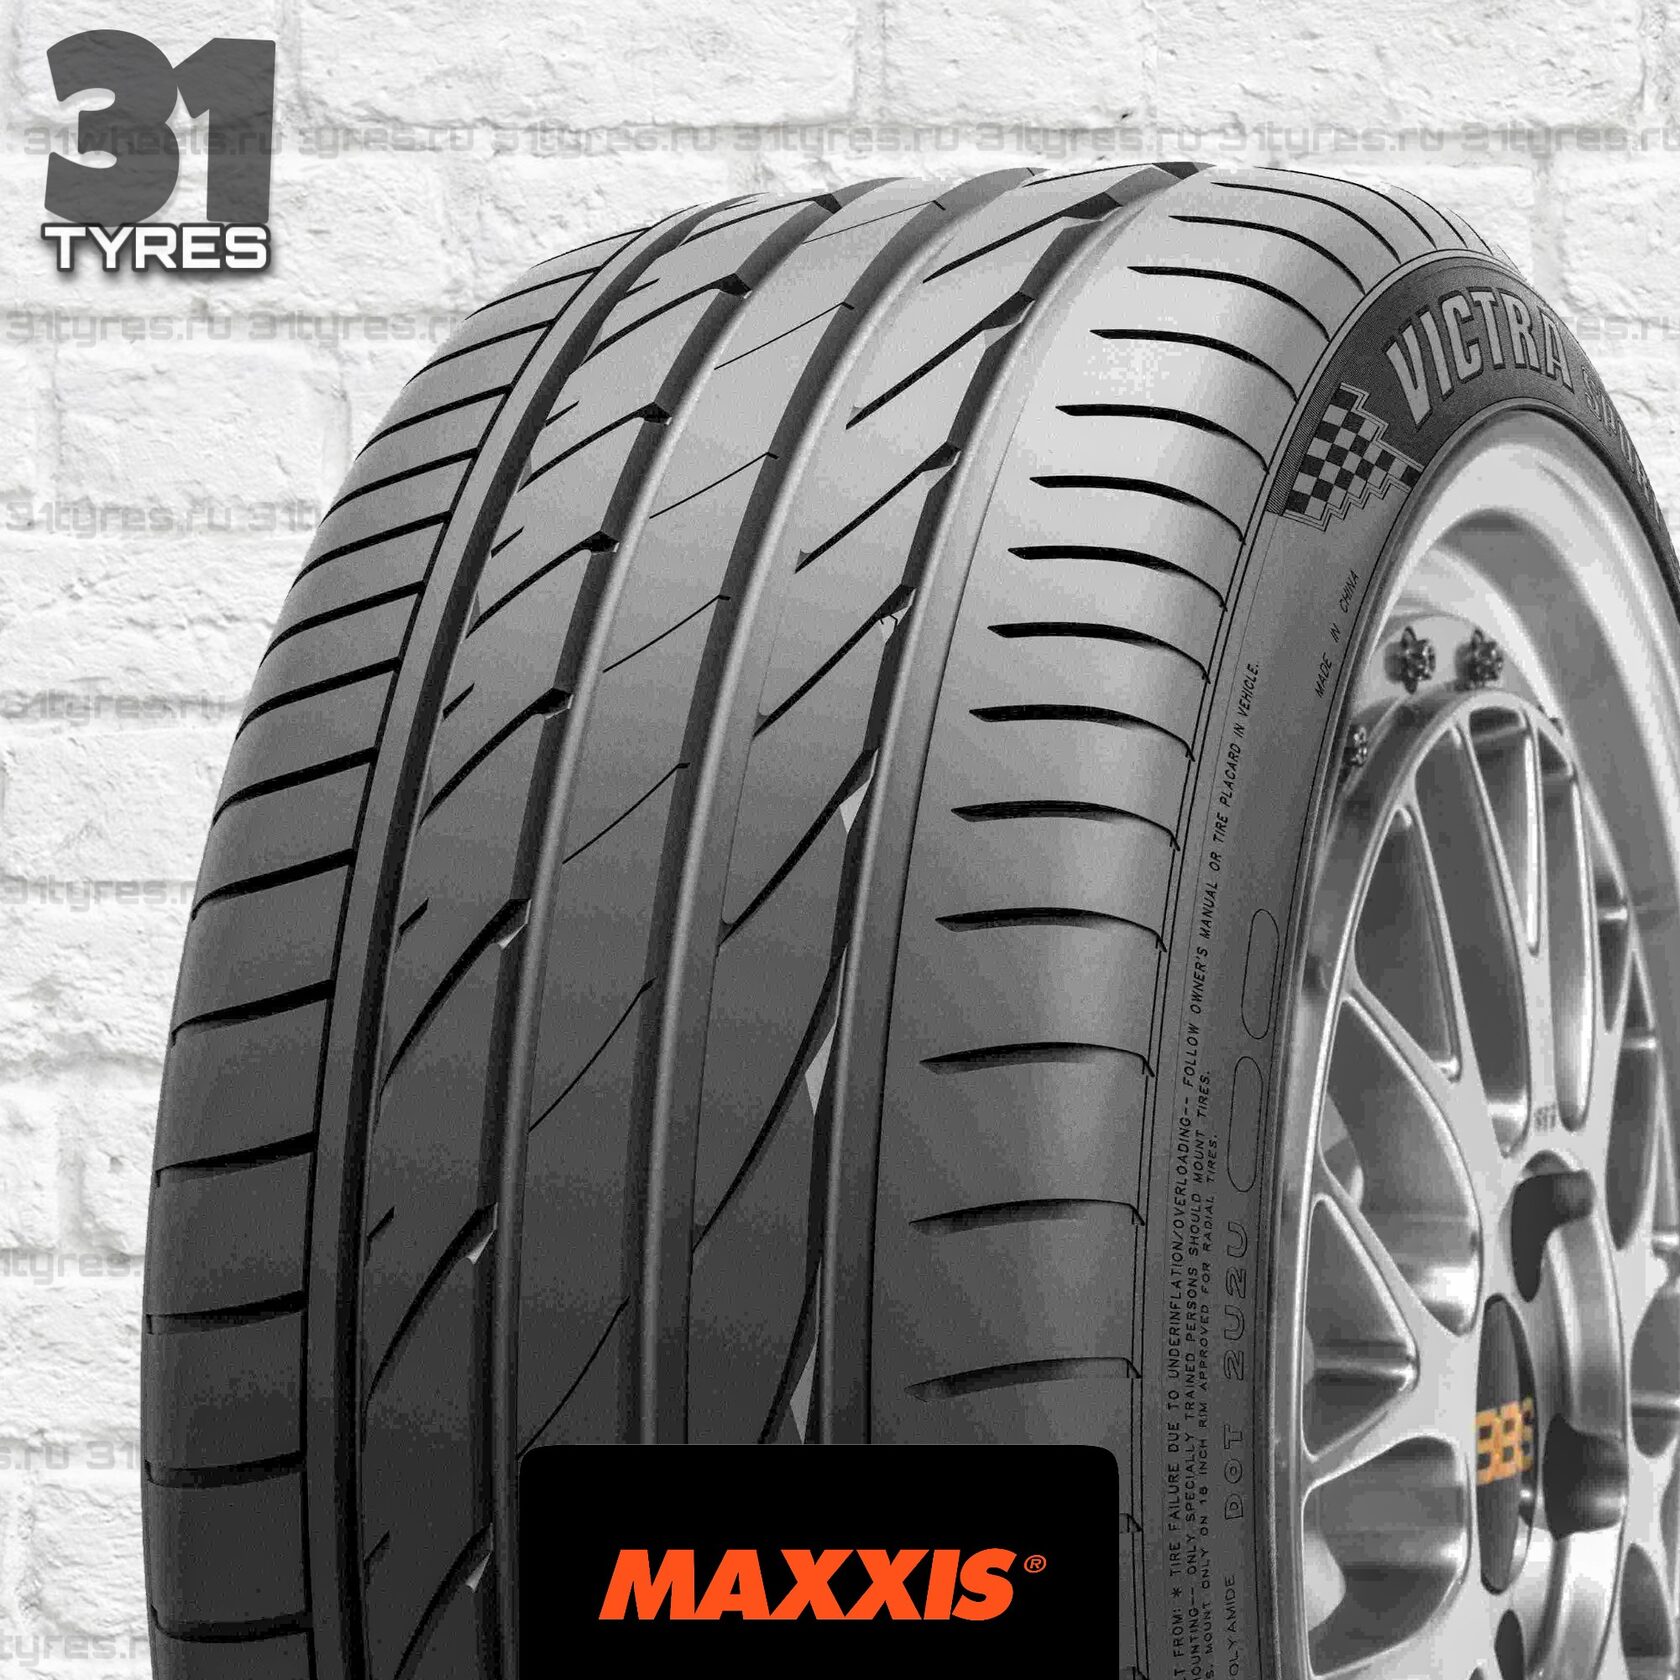 Maxxis victra sport 5 r19. Шины Maxxis Victra Sport 5. Maxxis Victra Sport vs5. Maxxis Victra Sport 5 SUV. Maxxis Victra Sport vs5 SUV.